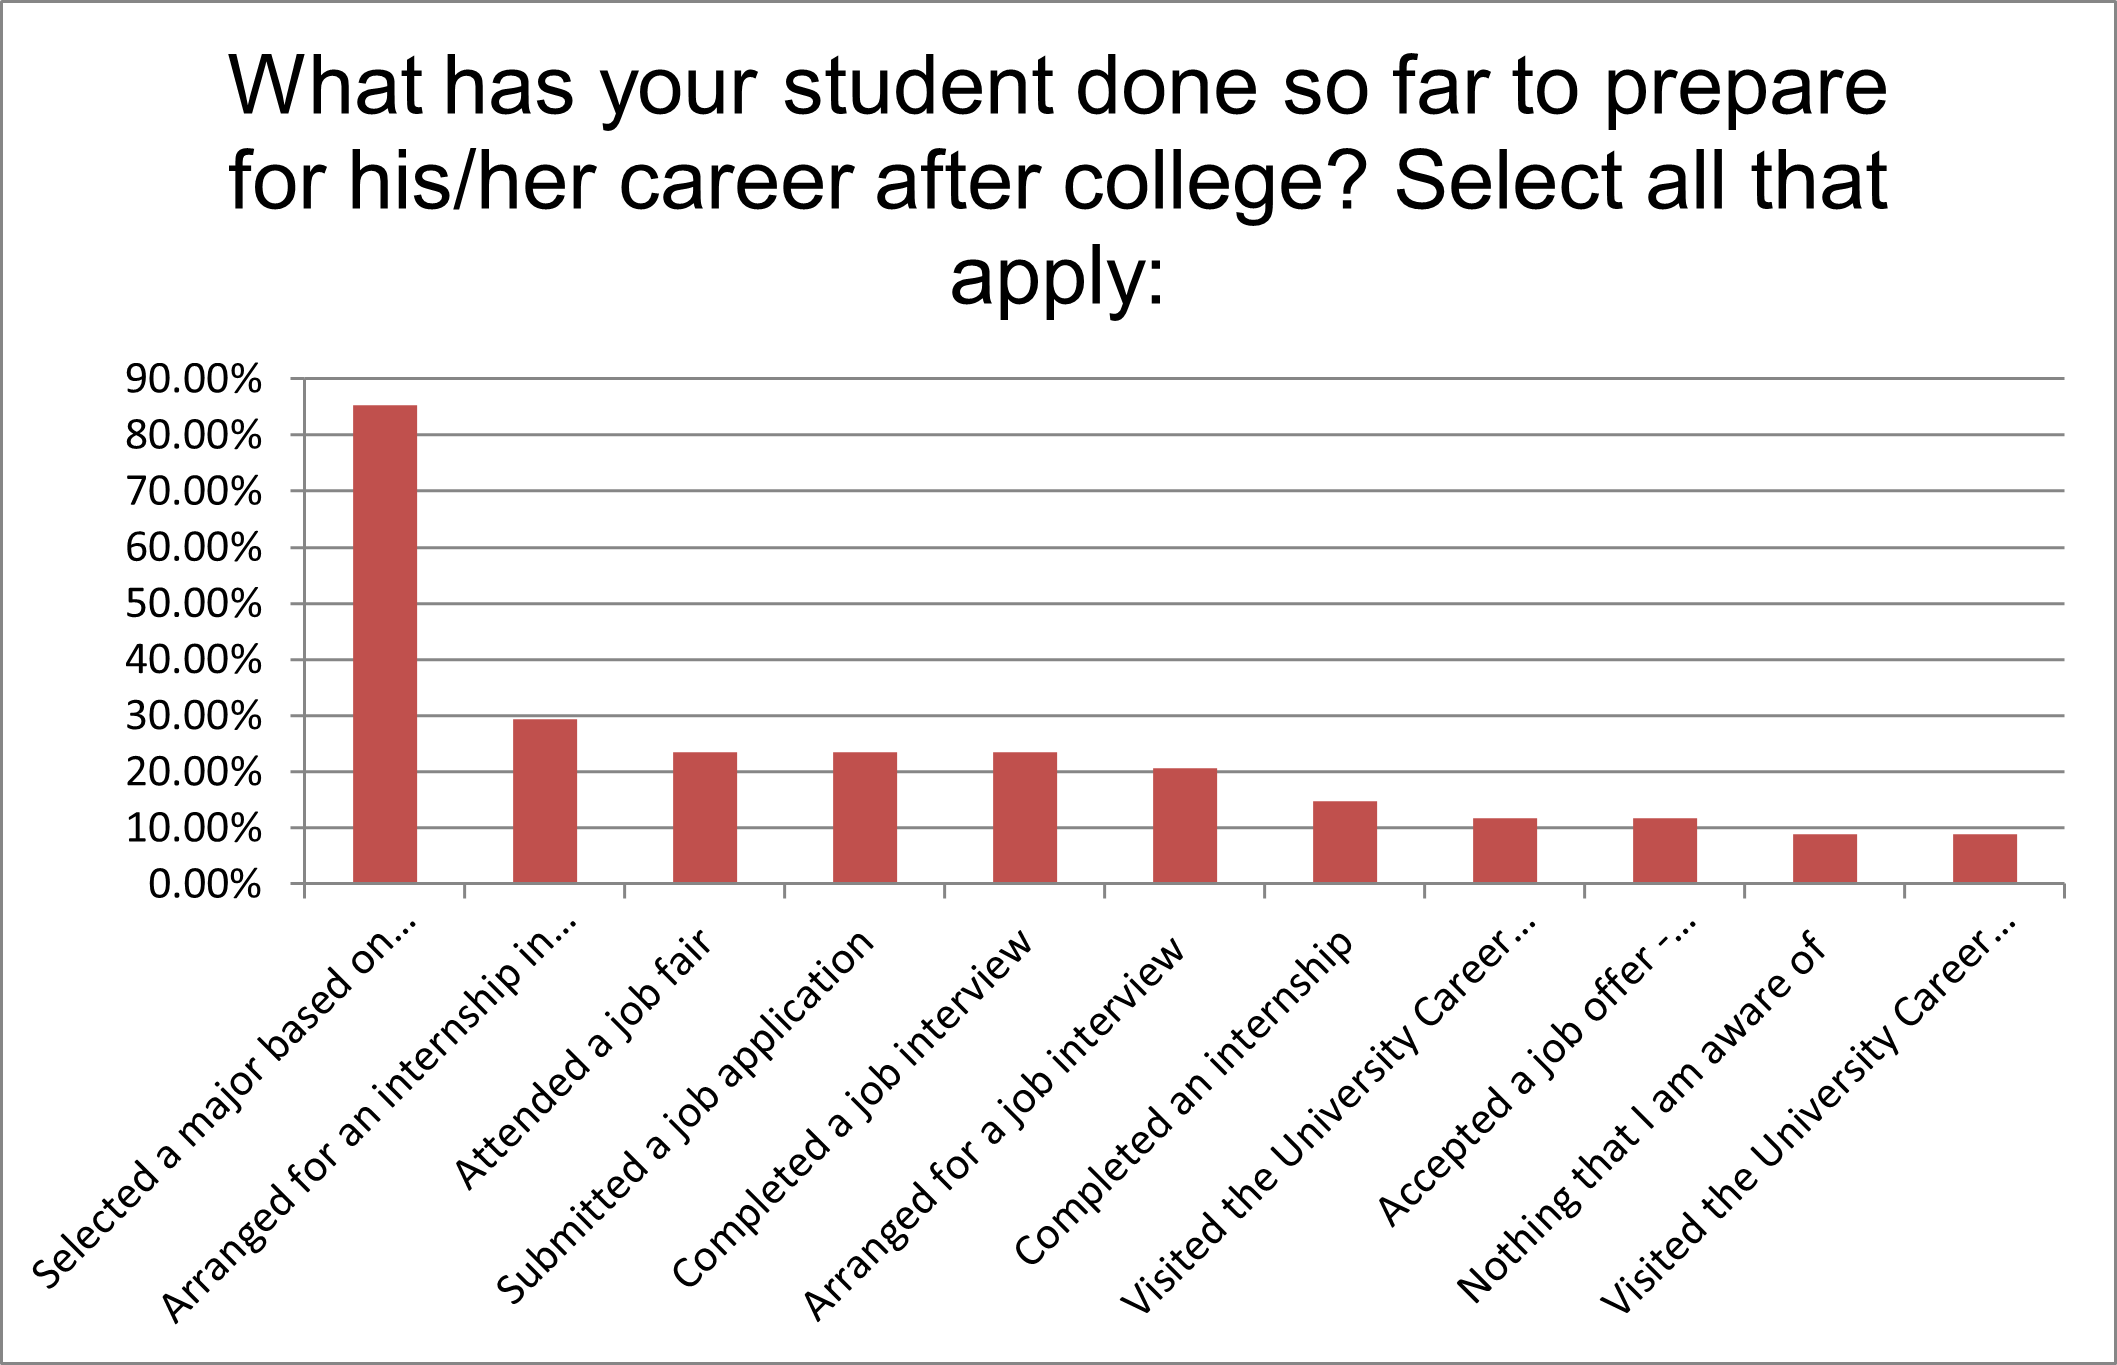 Chart showing responses to poll question, "What has your student done to prepare for a future career? 